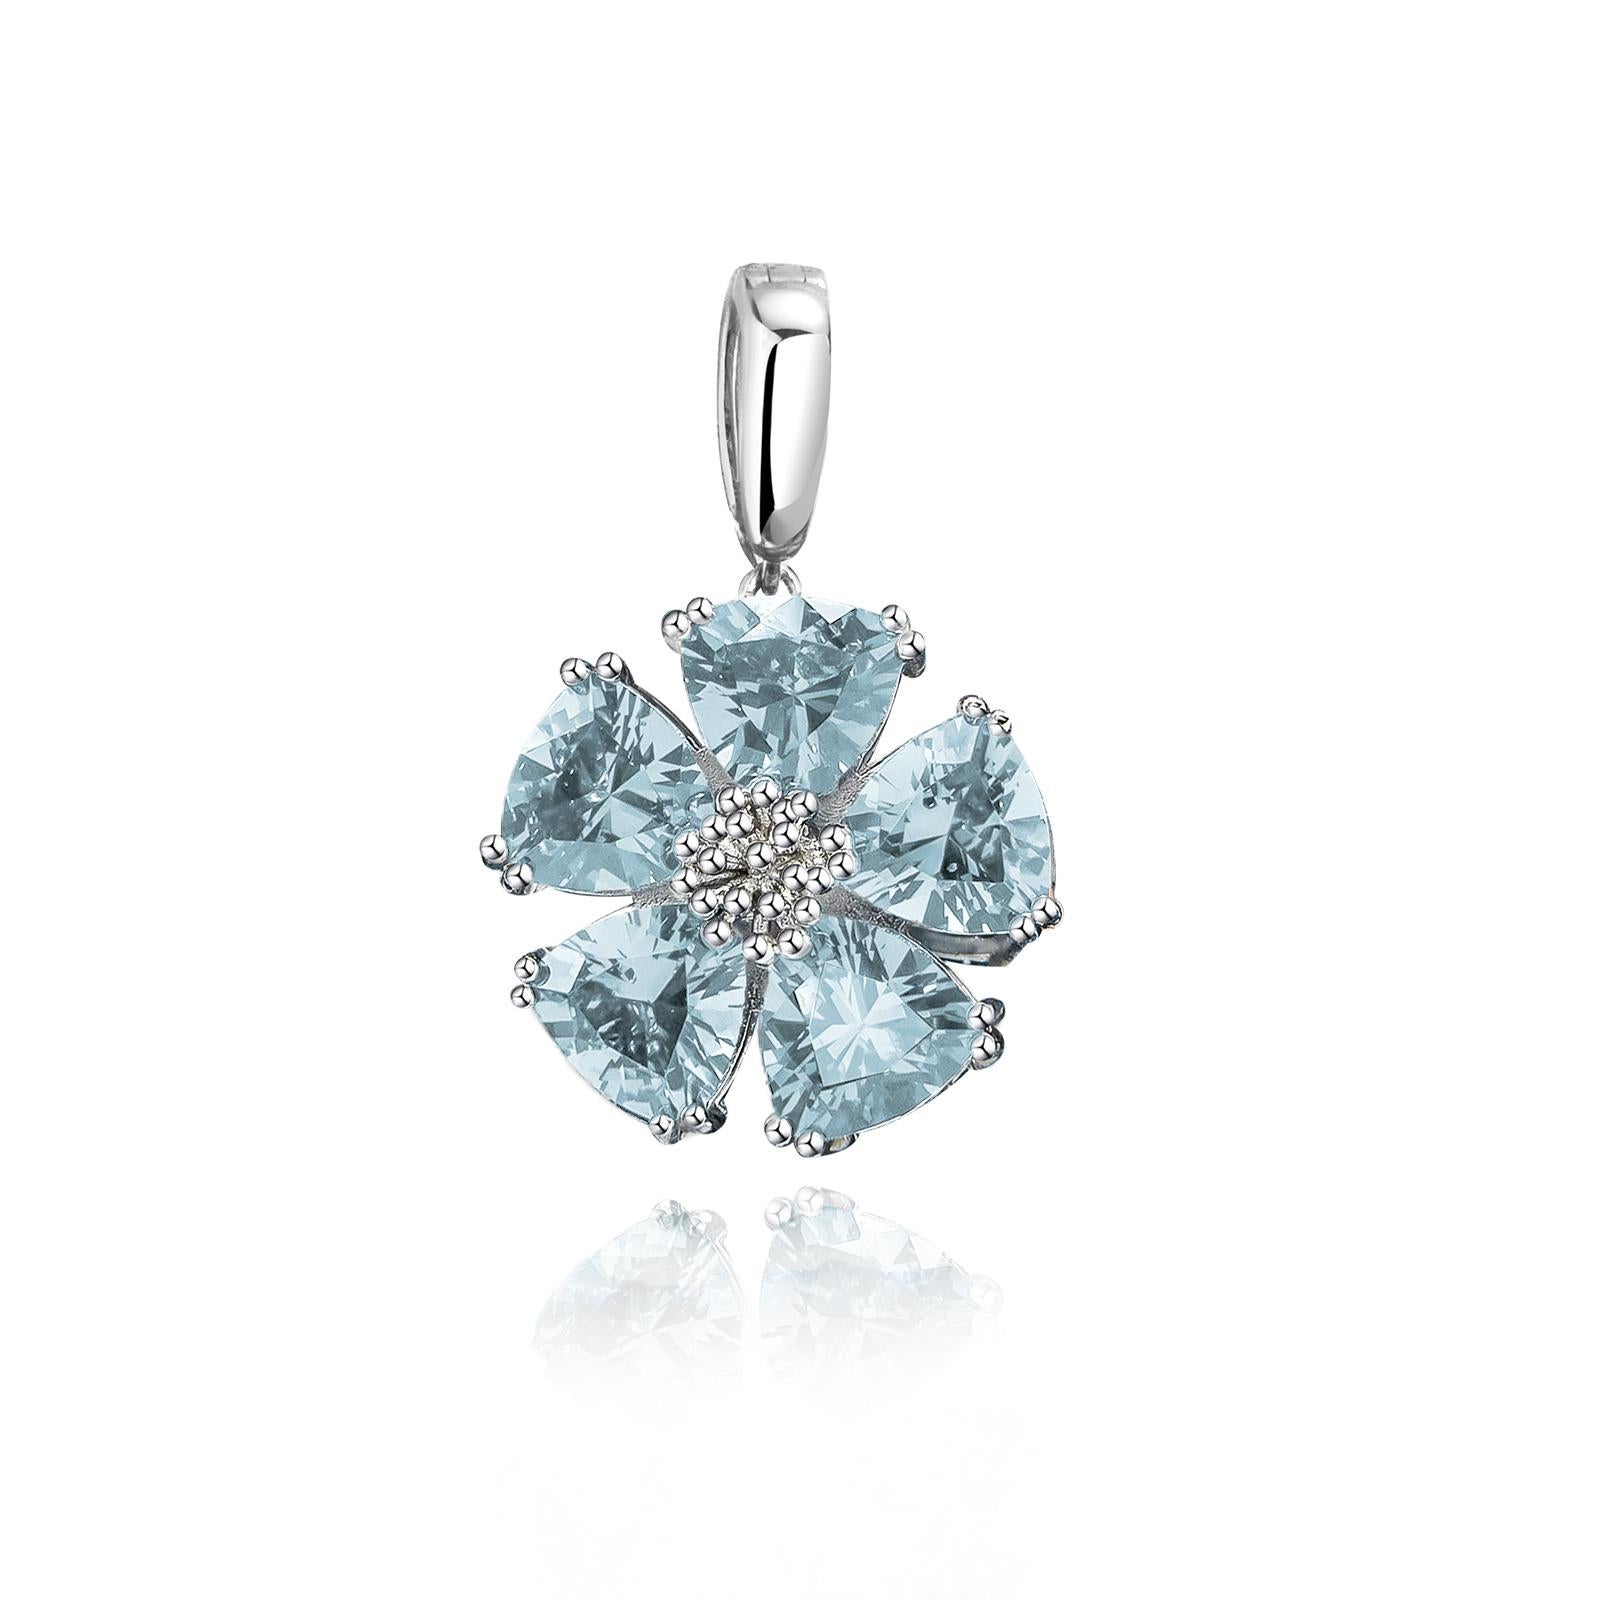 Designed in NYC

.925 Sterling Silver 5 x 7 mm White Topaz Blossom Stone Pendant. No matter the season, allow natural beauty to surround you wherever you go. Blossom stone pendant: 

Sterling silver 
High-polish finish
Light-weight 
20 mm blossom